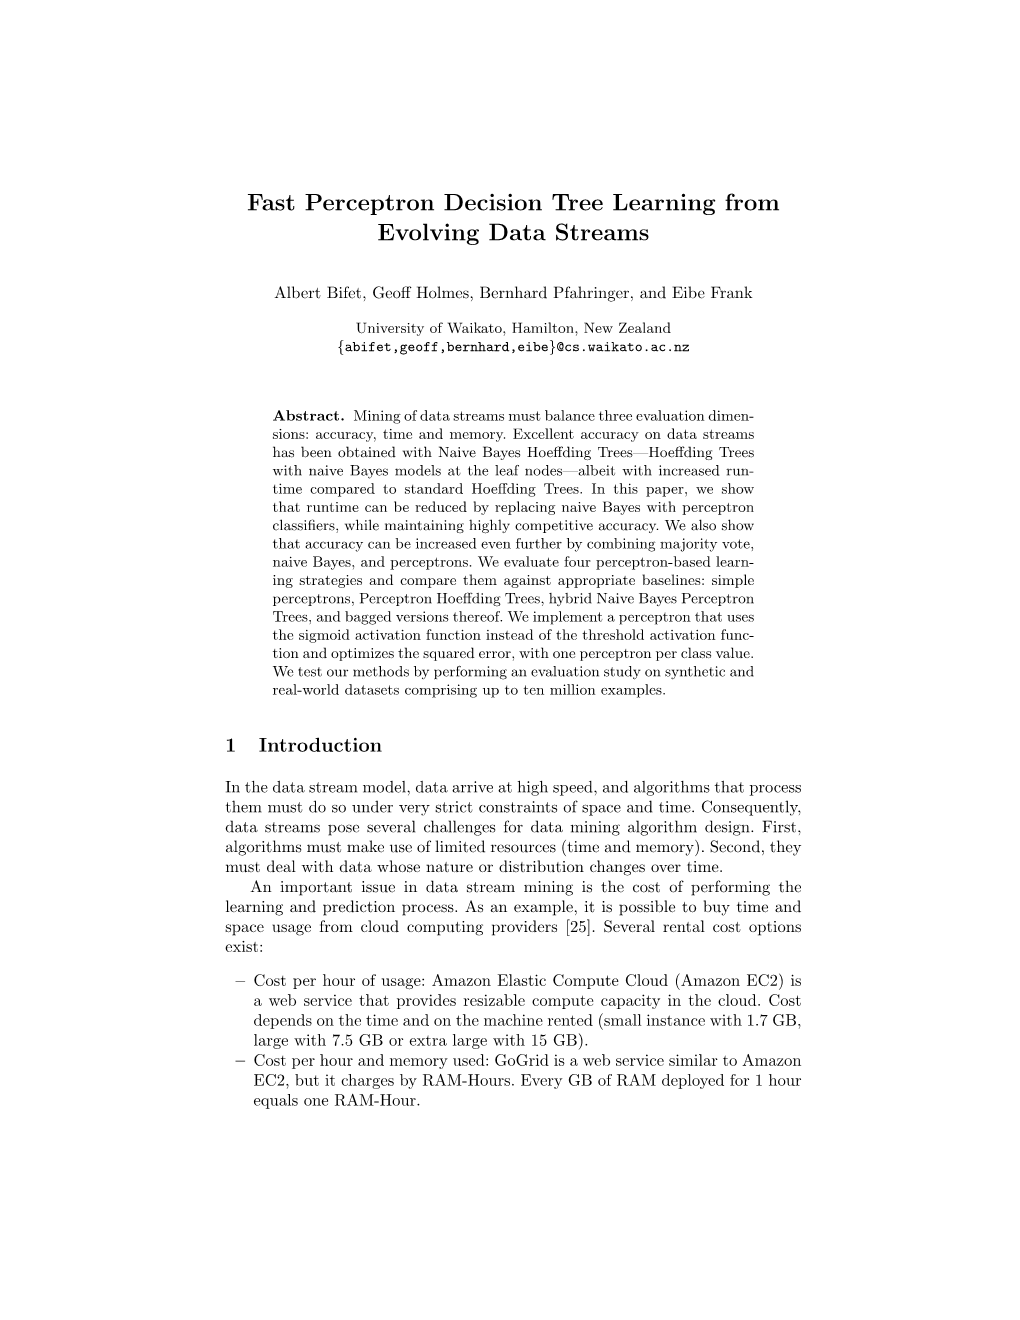 Fast Perceptron Decision Tree Learning from Evolving Data Streams